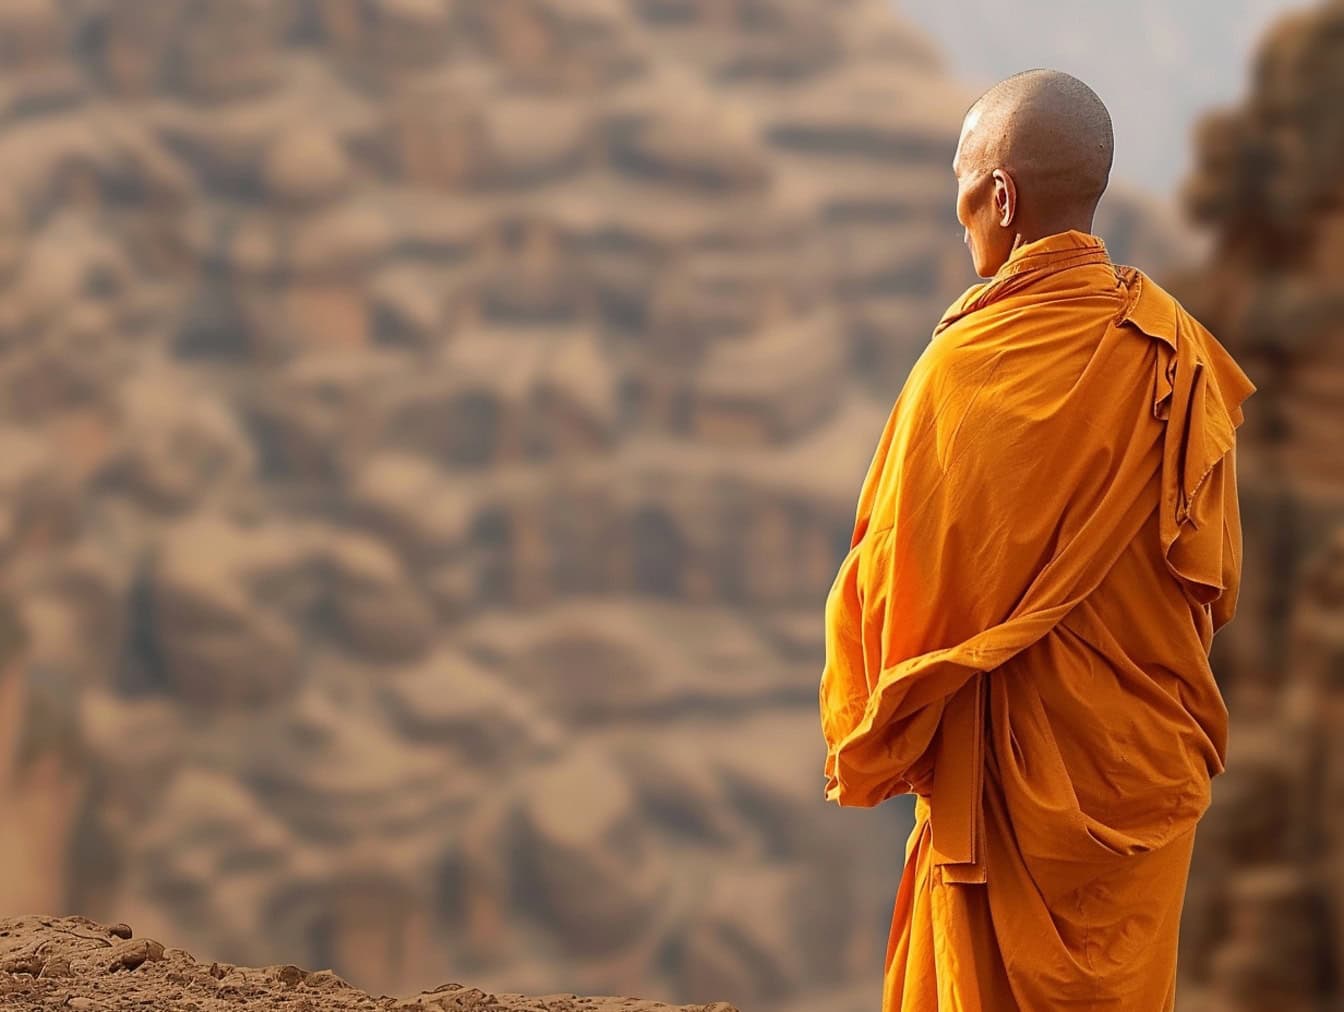 A Buddhist monk with a shaved head stands with his back turned in the desert dressed in an orange robe